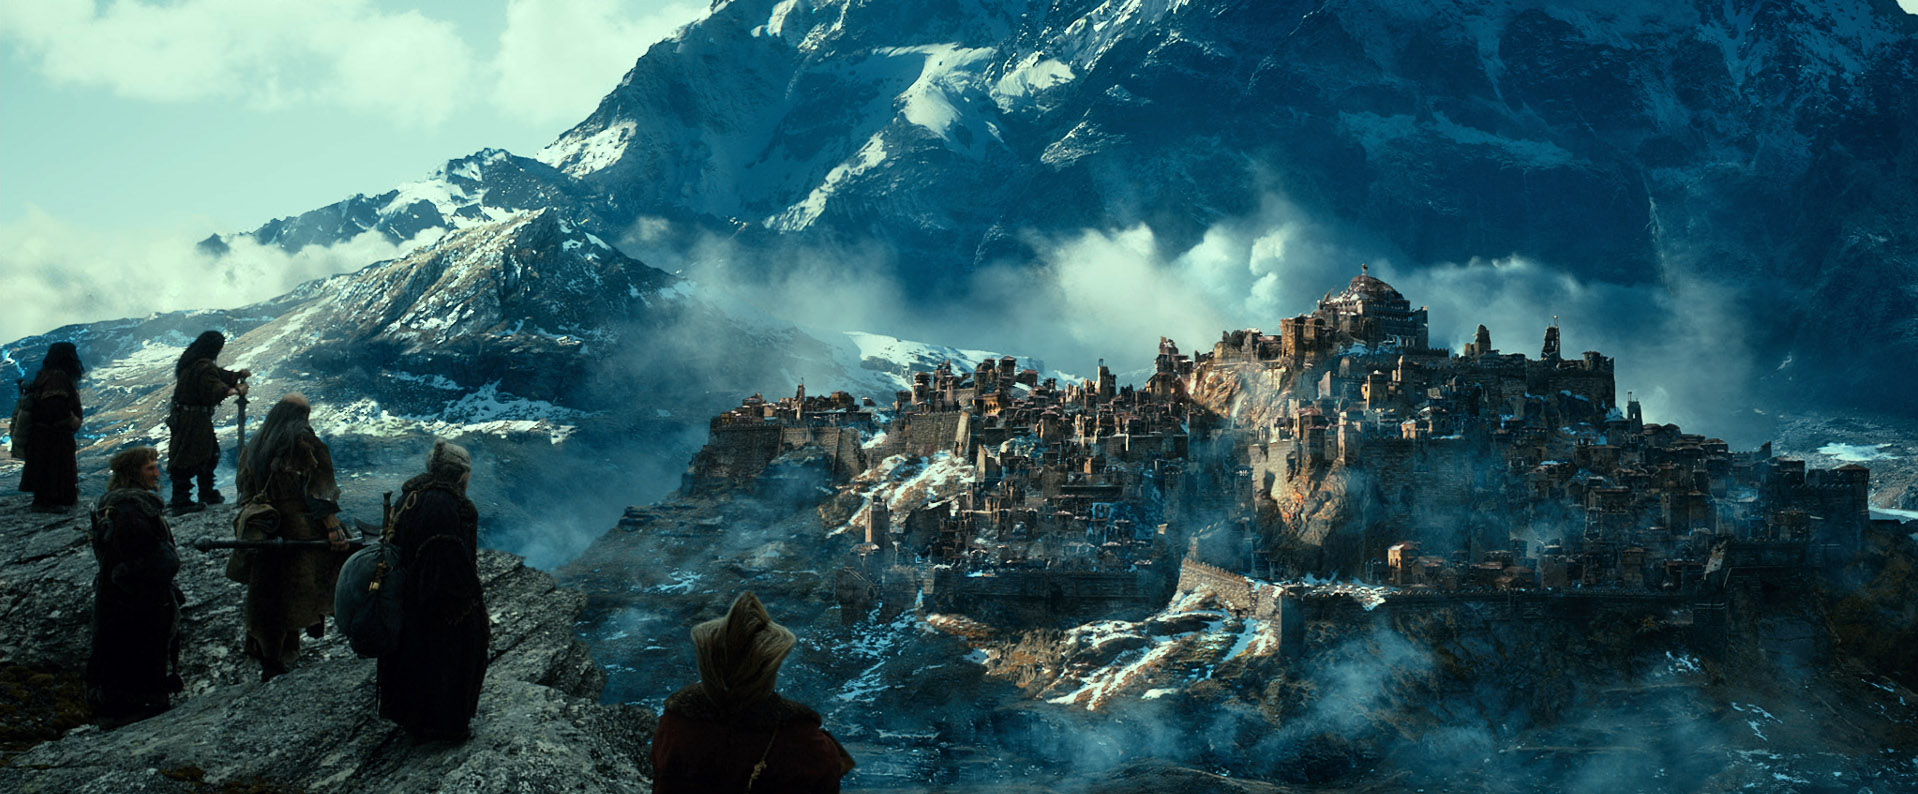 download the new version for mac The Hobbit: The Desolation of Smaug